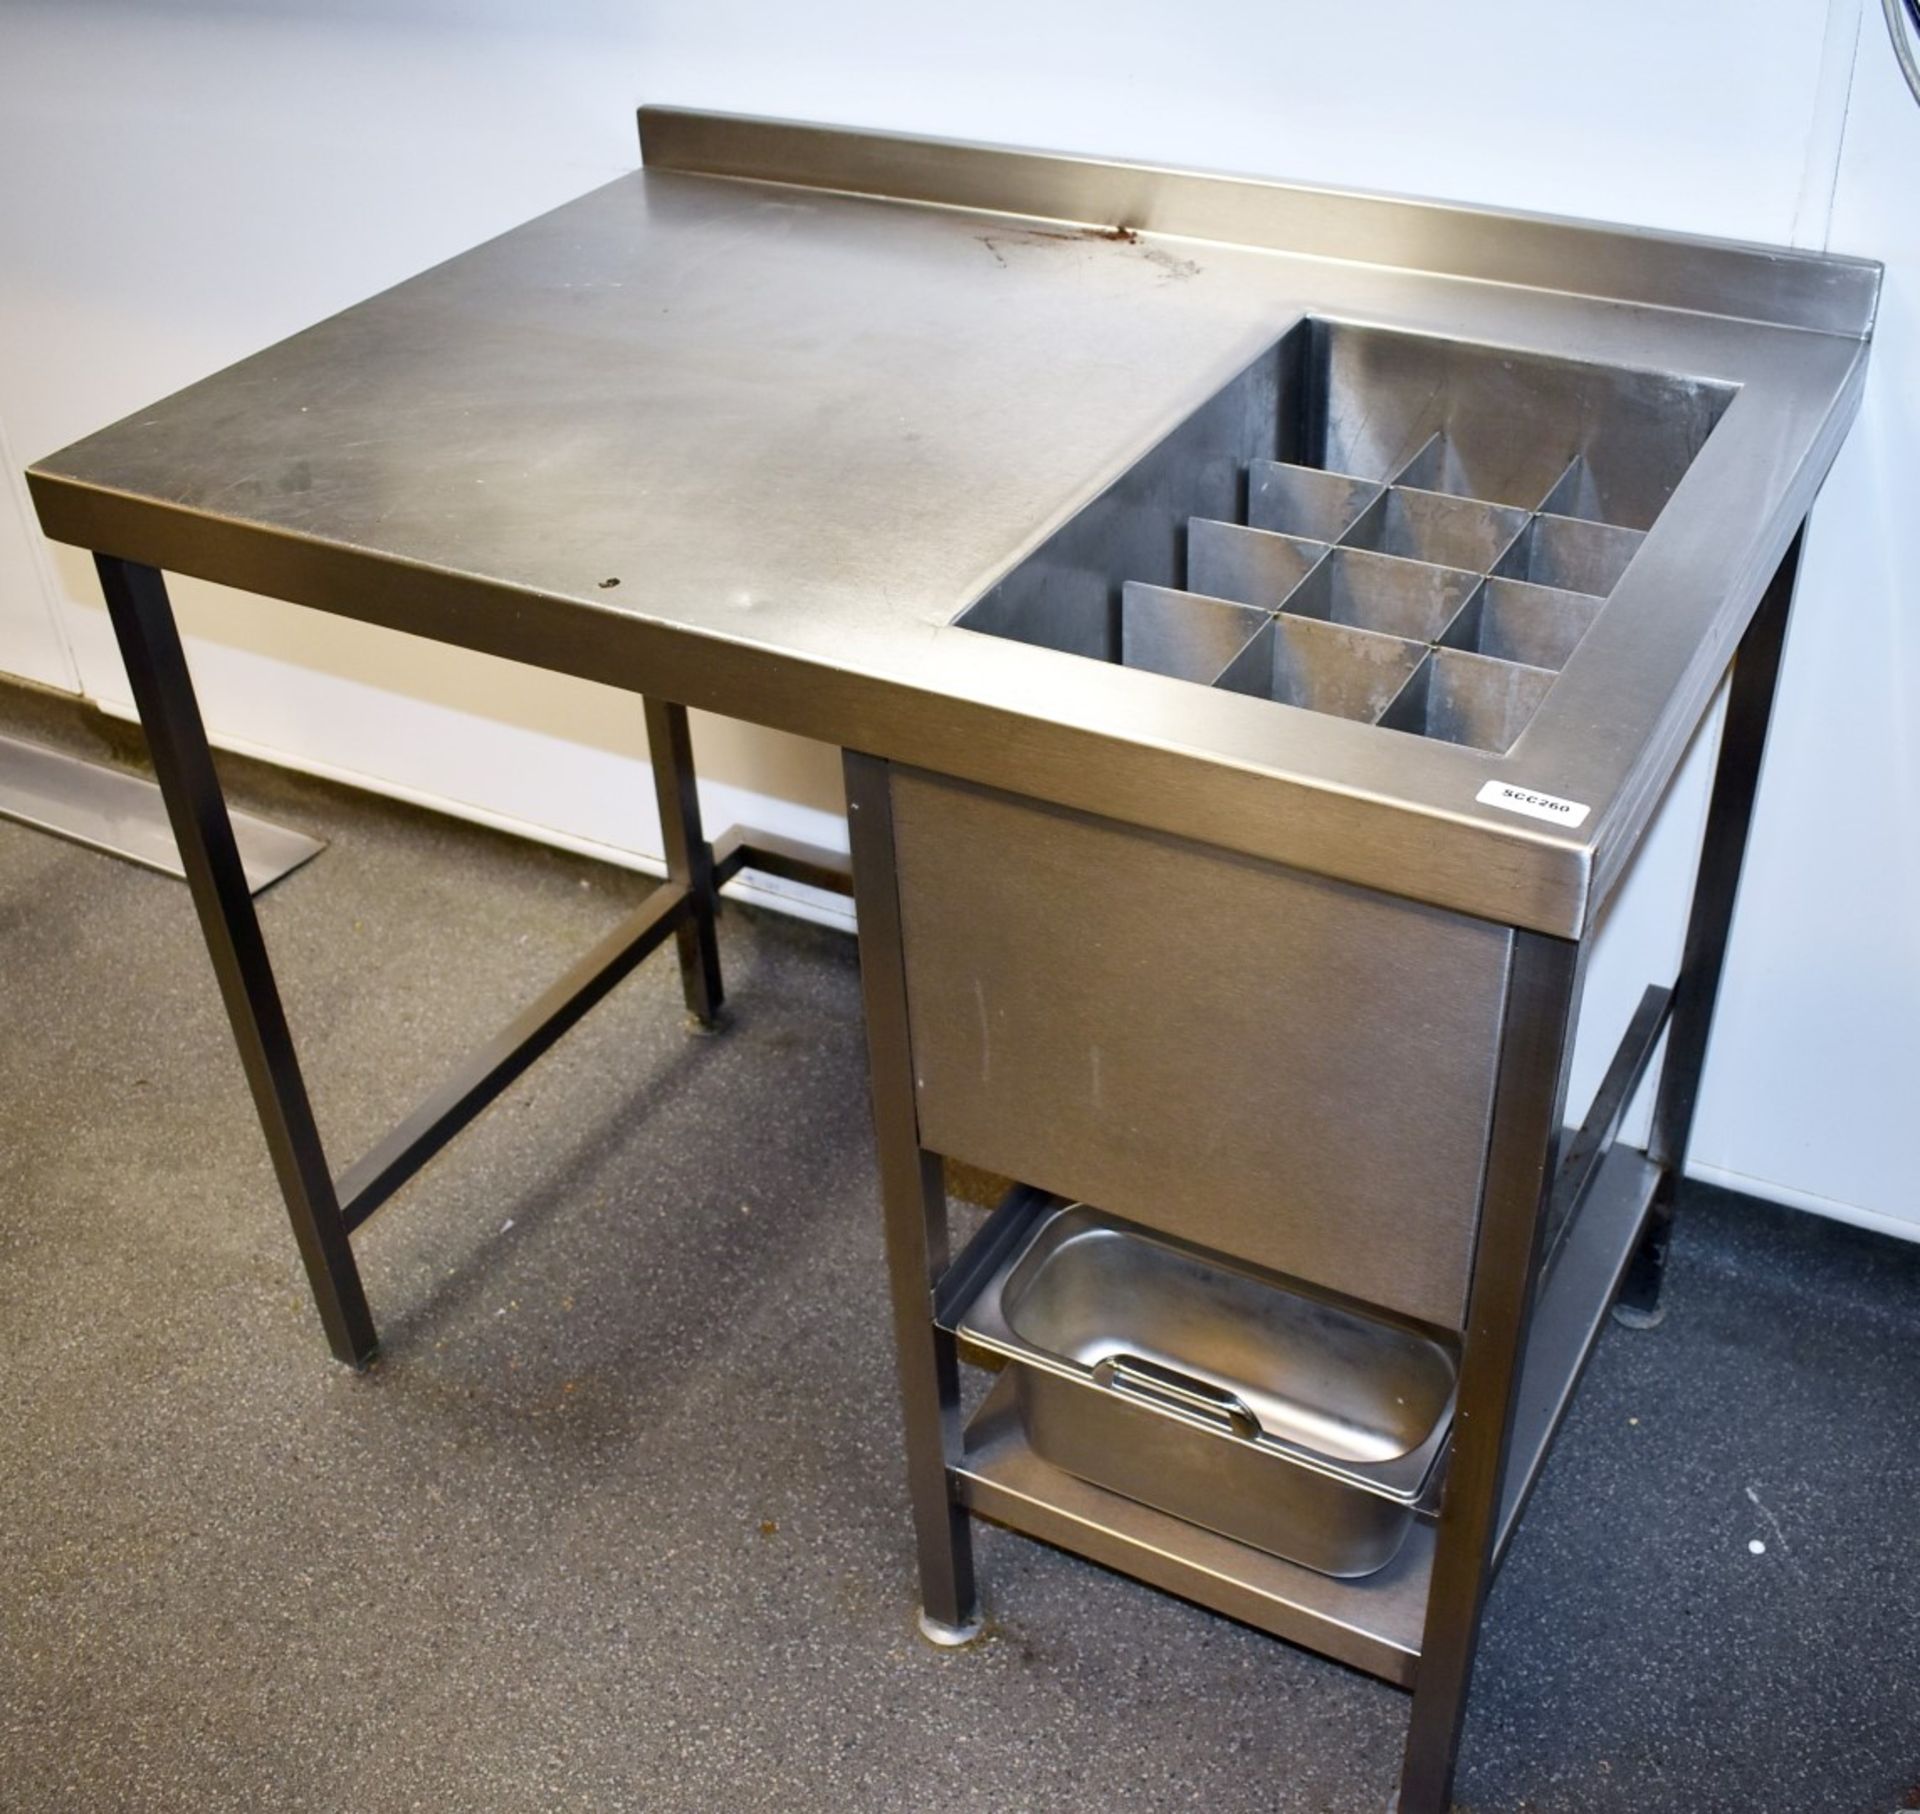 1 x Stainless Steel Prep Table With Integrated Ice Well and Sauce Bottle Dividers